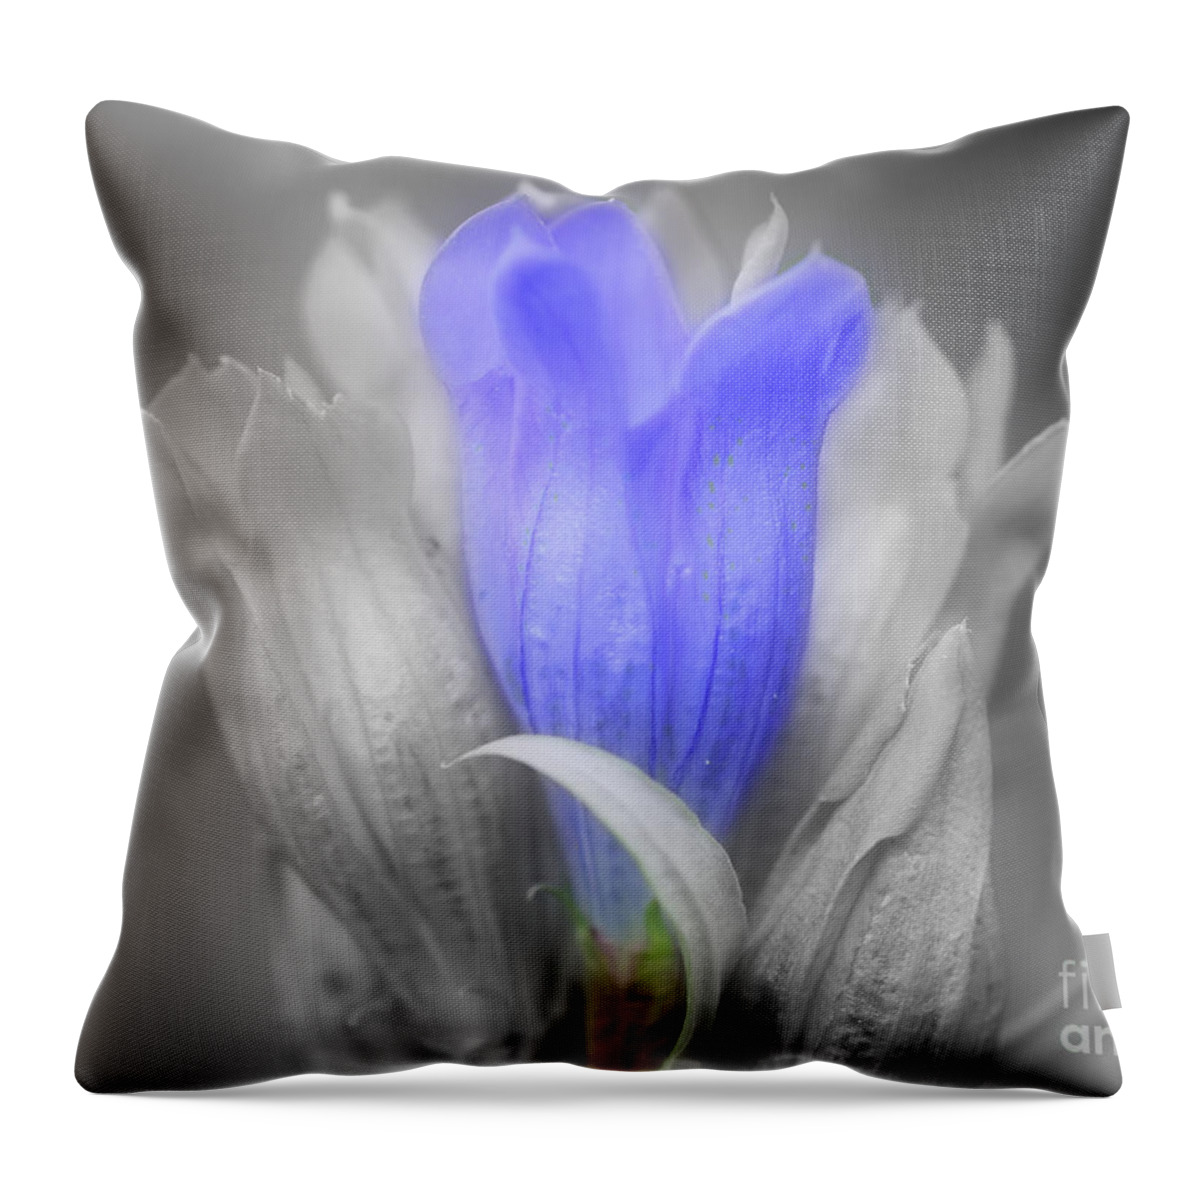 Flower Throw Pillow featuring the photograph Blue Gentian Flower In Partial Color by Smilin Eyes Treasures